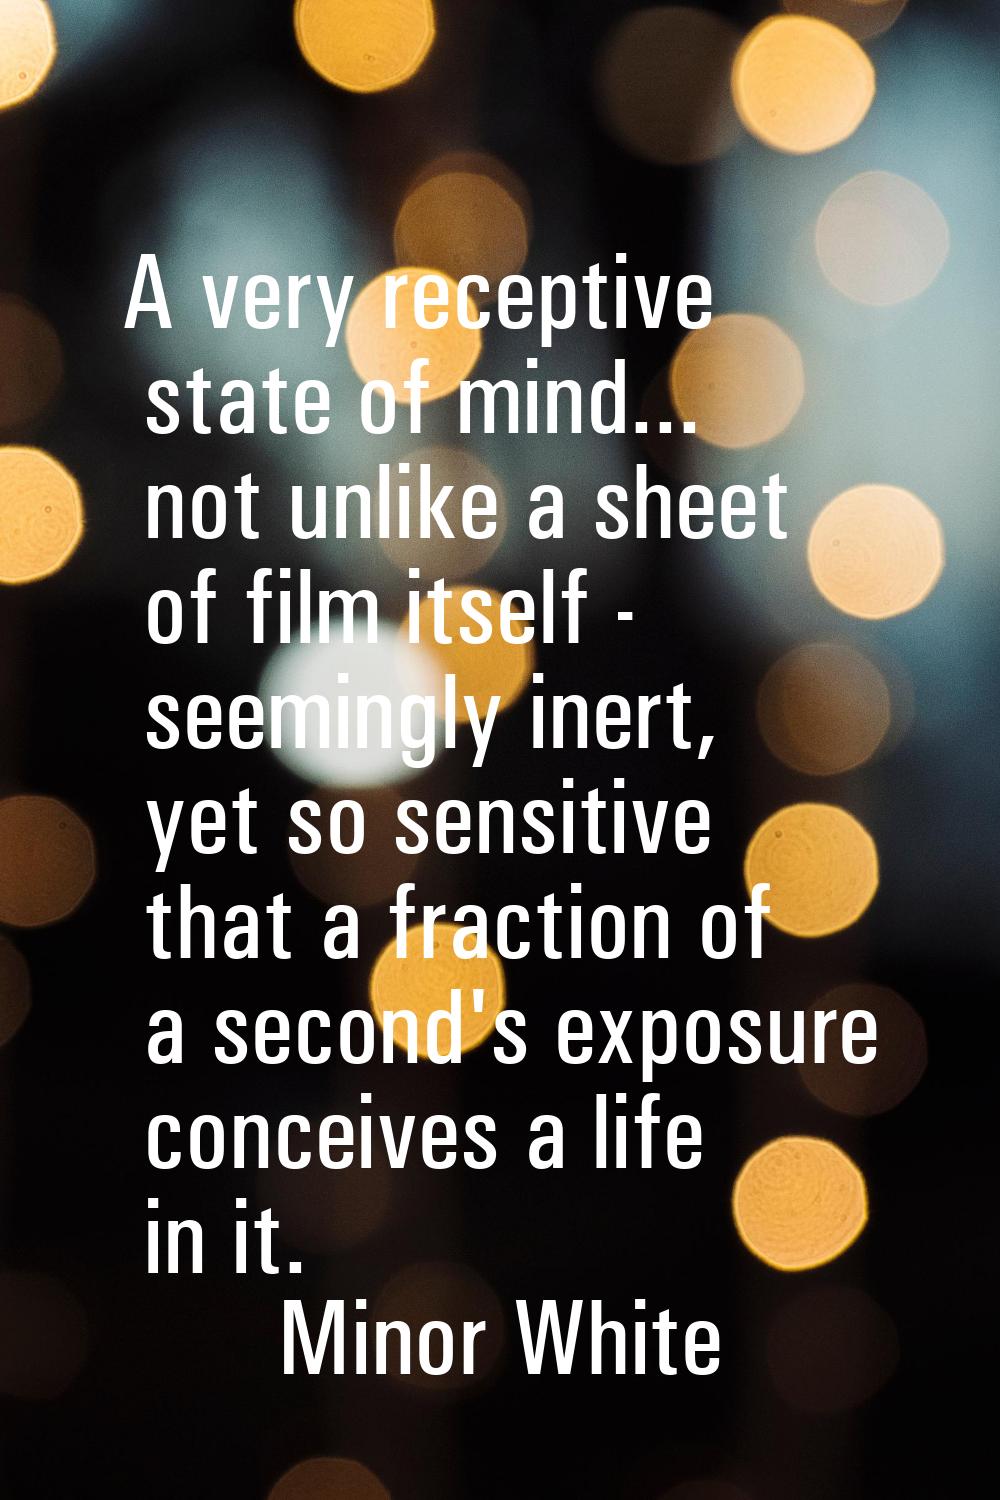 A very receptive state of mind... not unlike a sheet of film itself - seemingly inert, yet so sensi